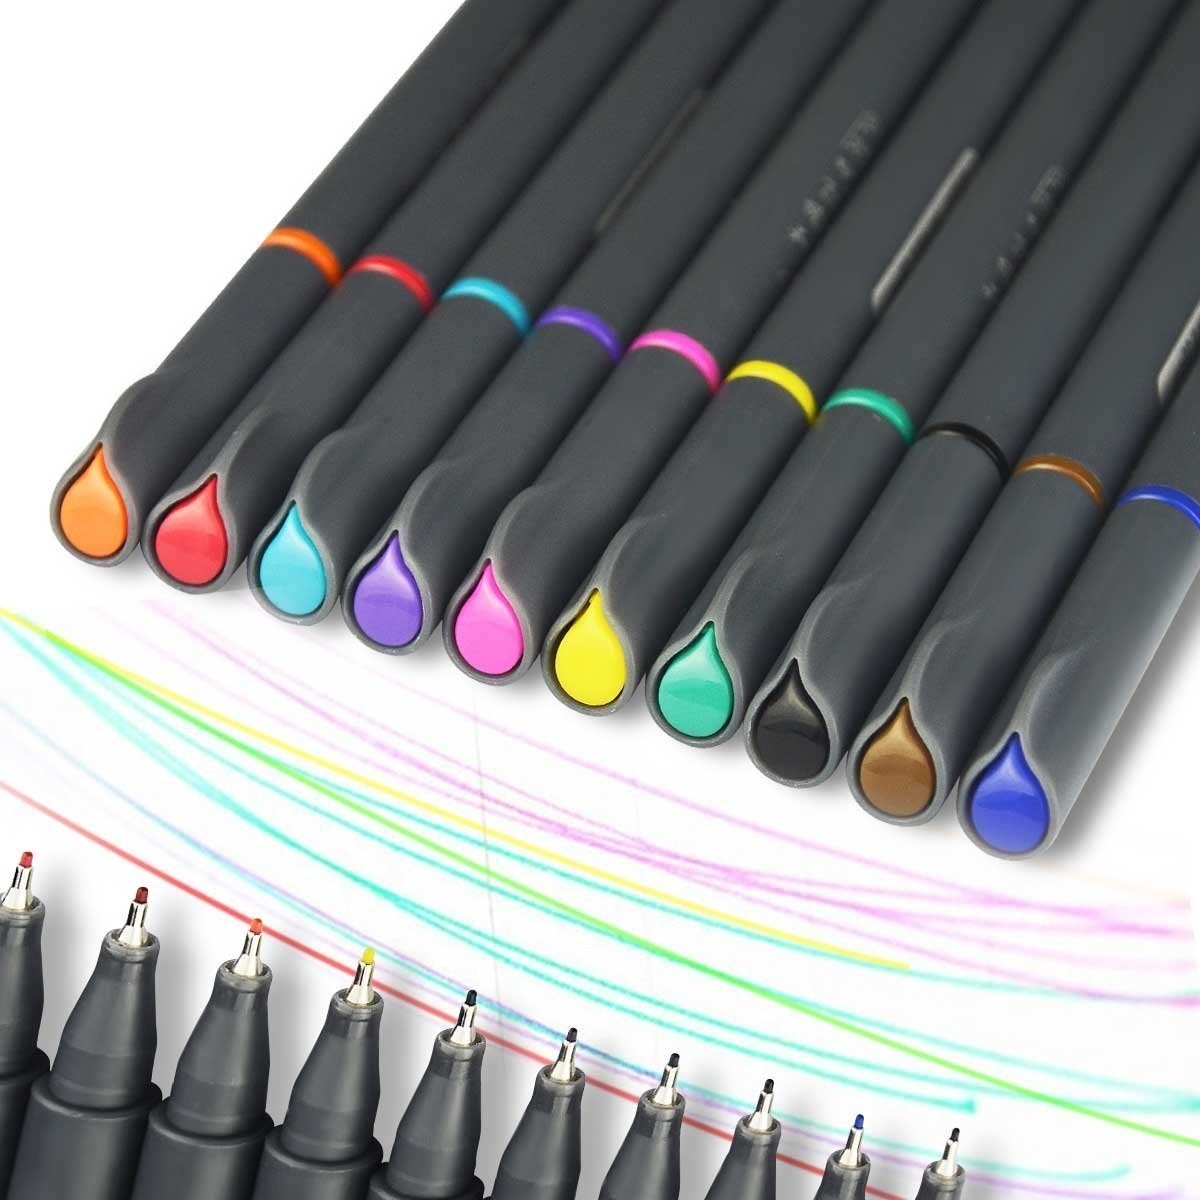 A pack of fine-tipped pens lying on a blank paper